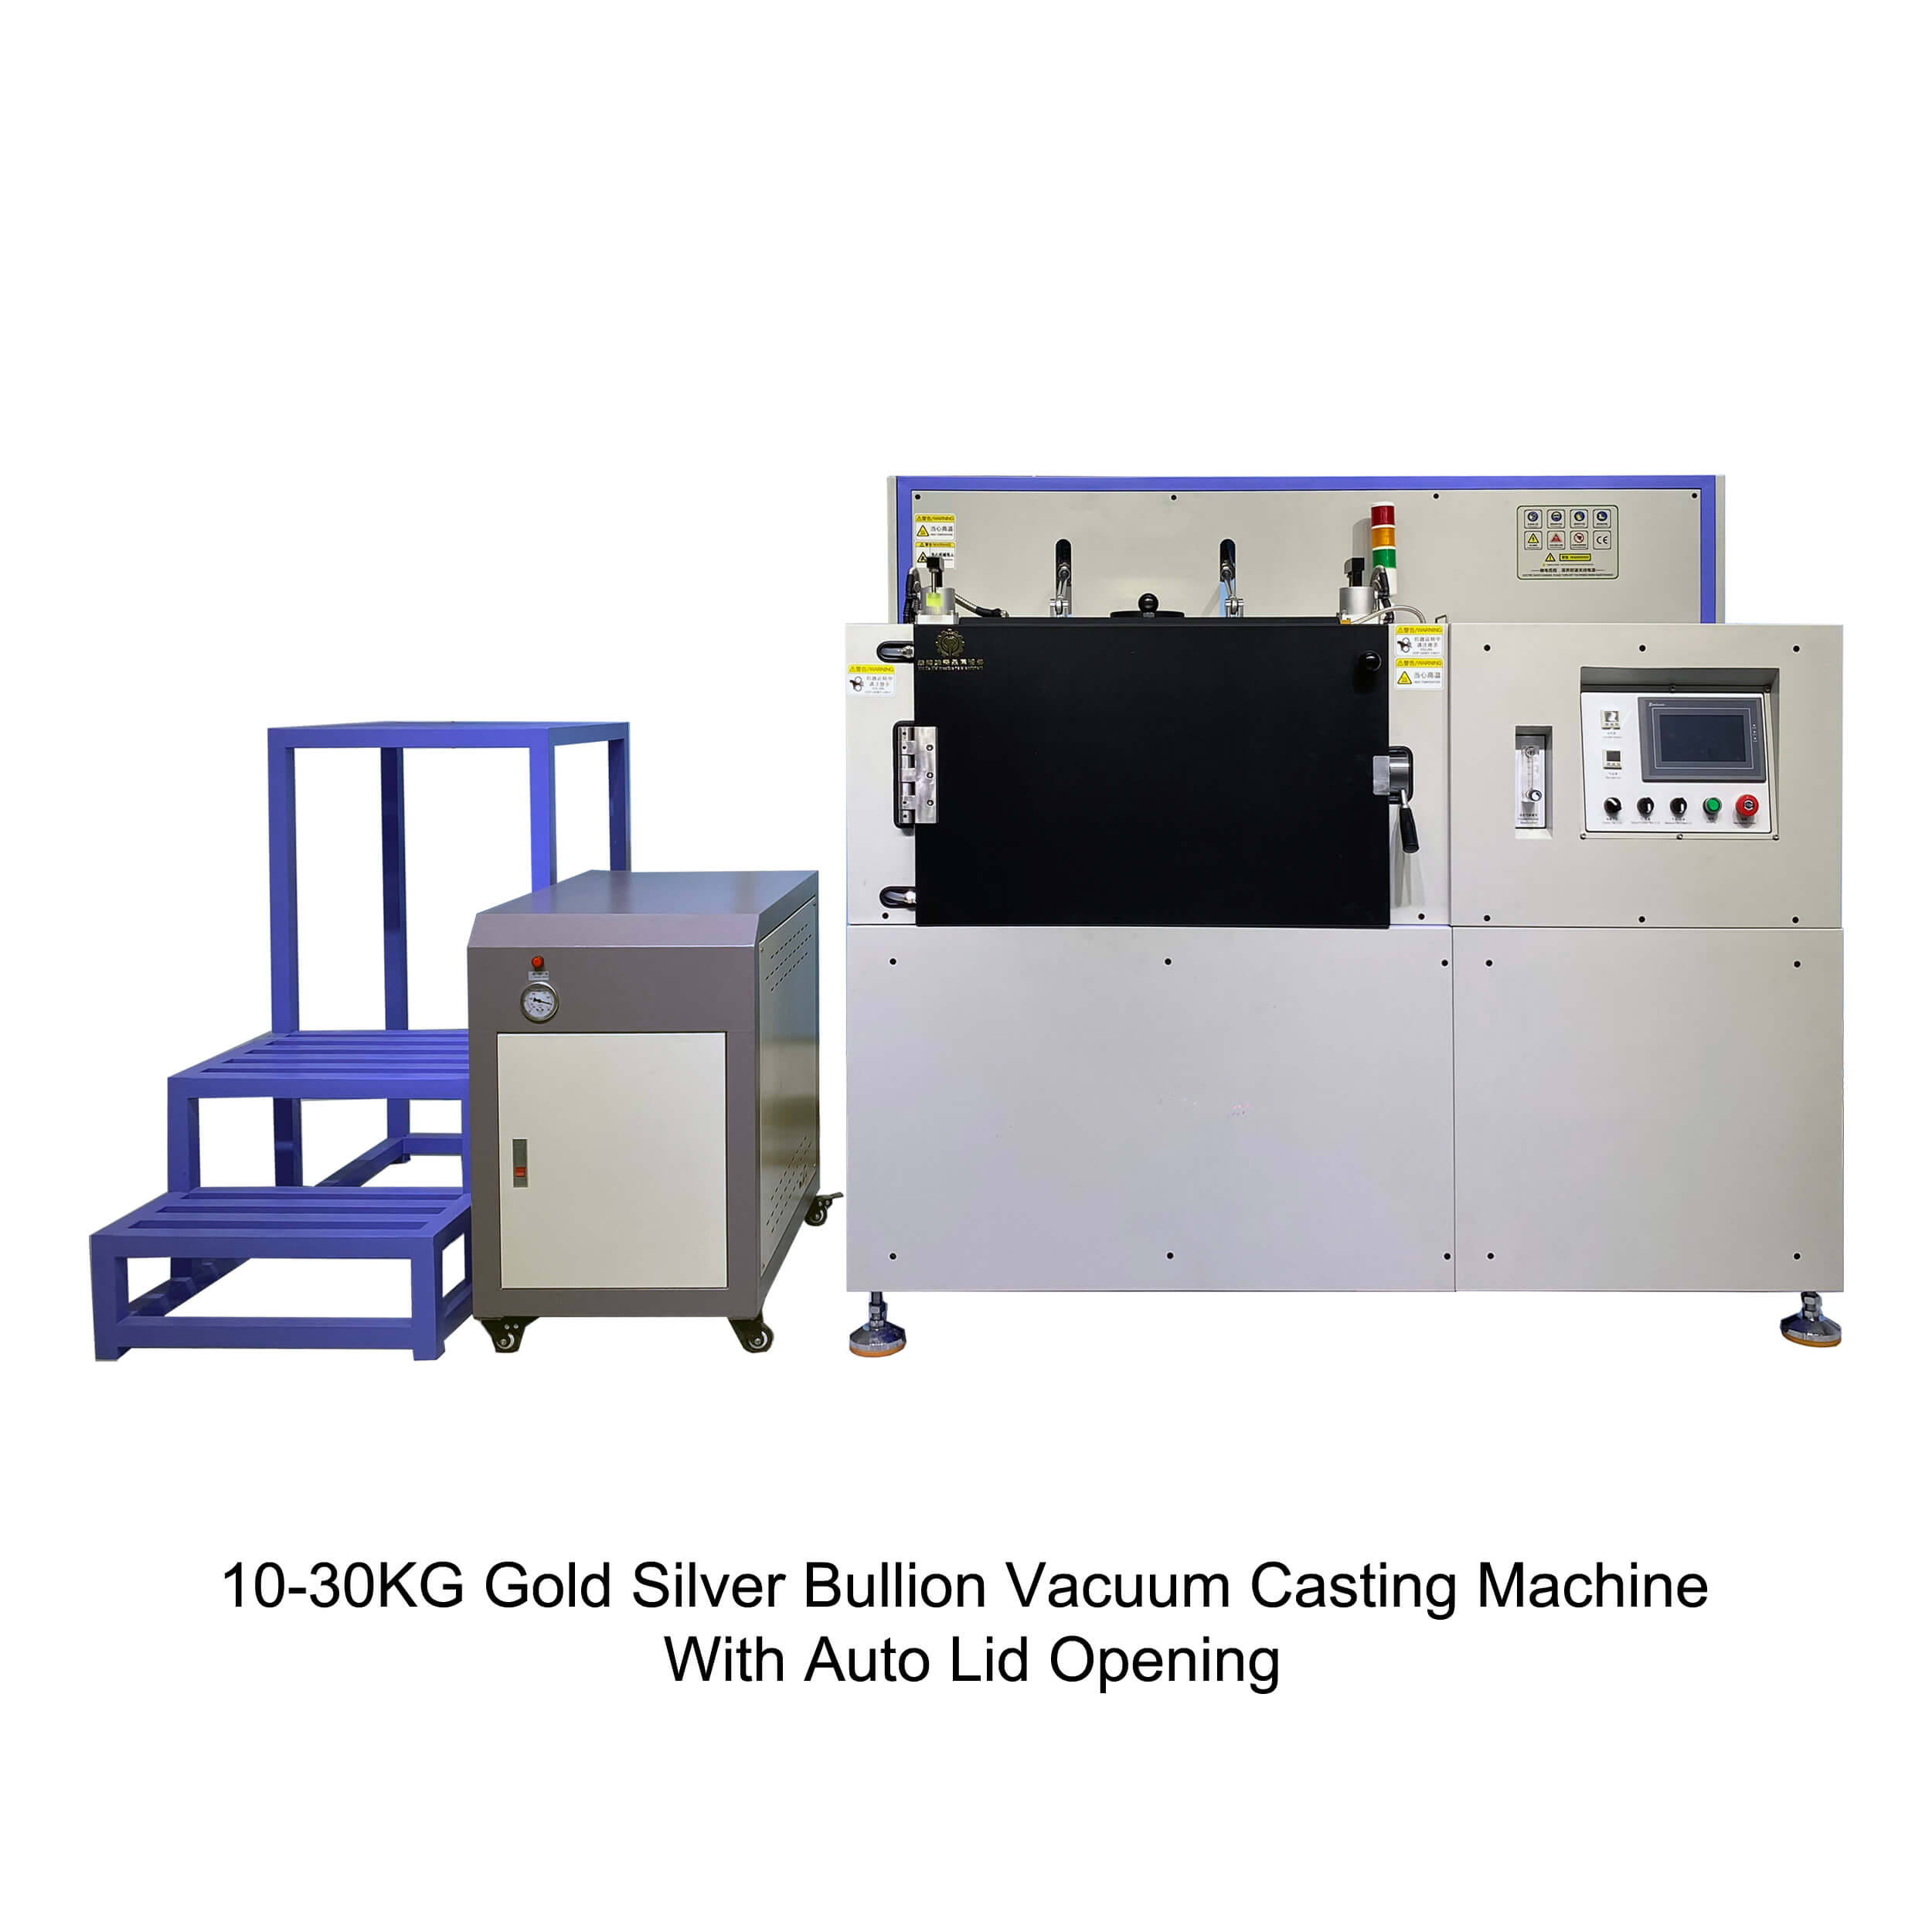 ZIROXI Vacuum Casting Machine, Vacuum Investing Casting Investment Machine,  Digital Display Up to 2100°f, Gold Melting Furnace for Melting Silver